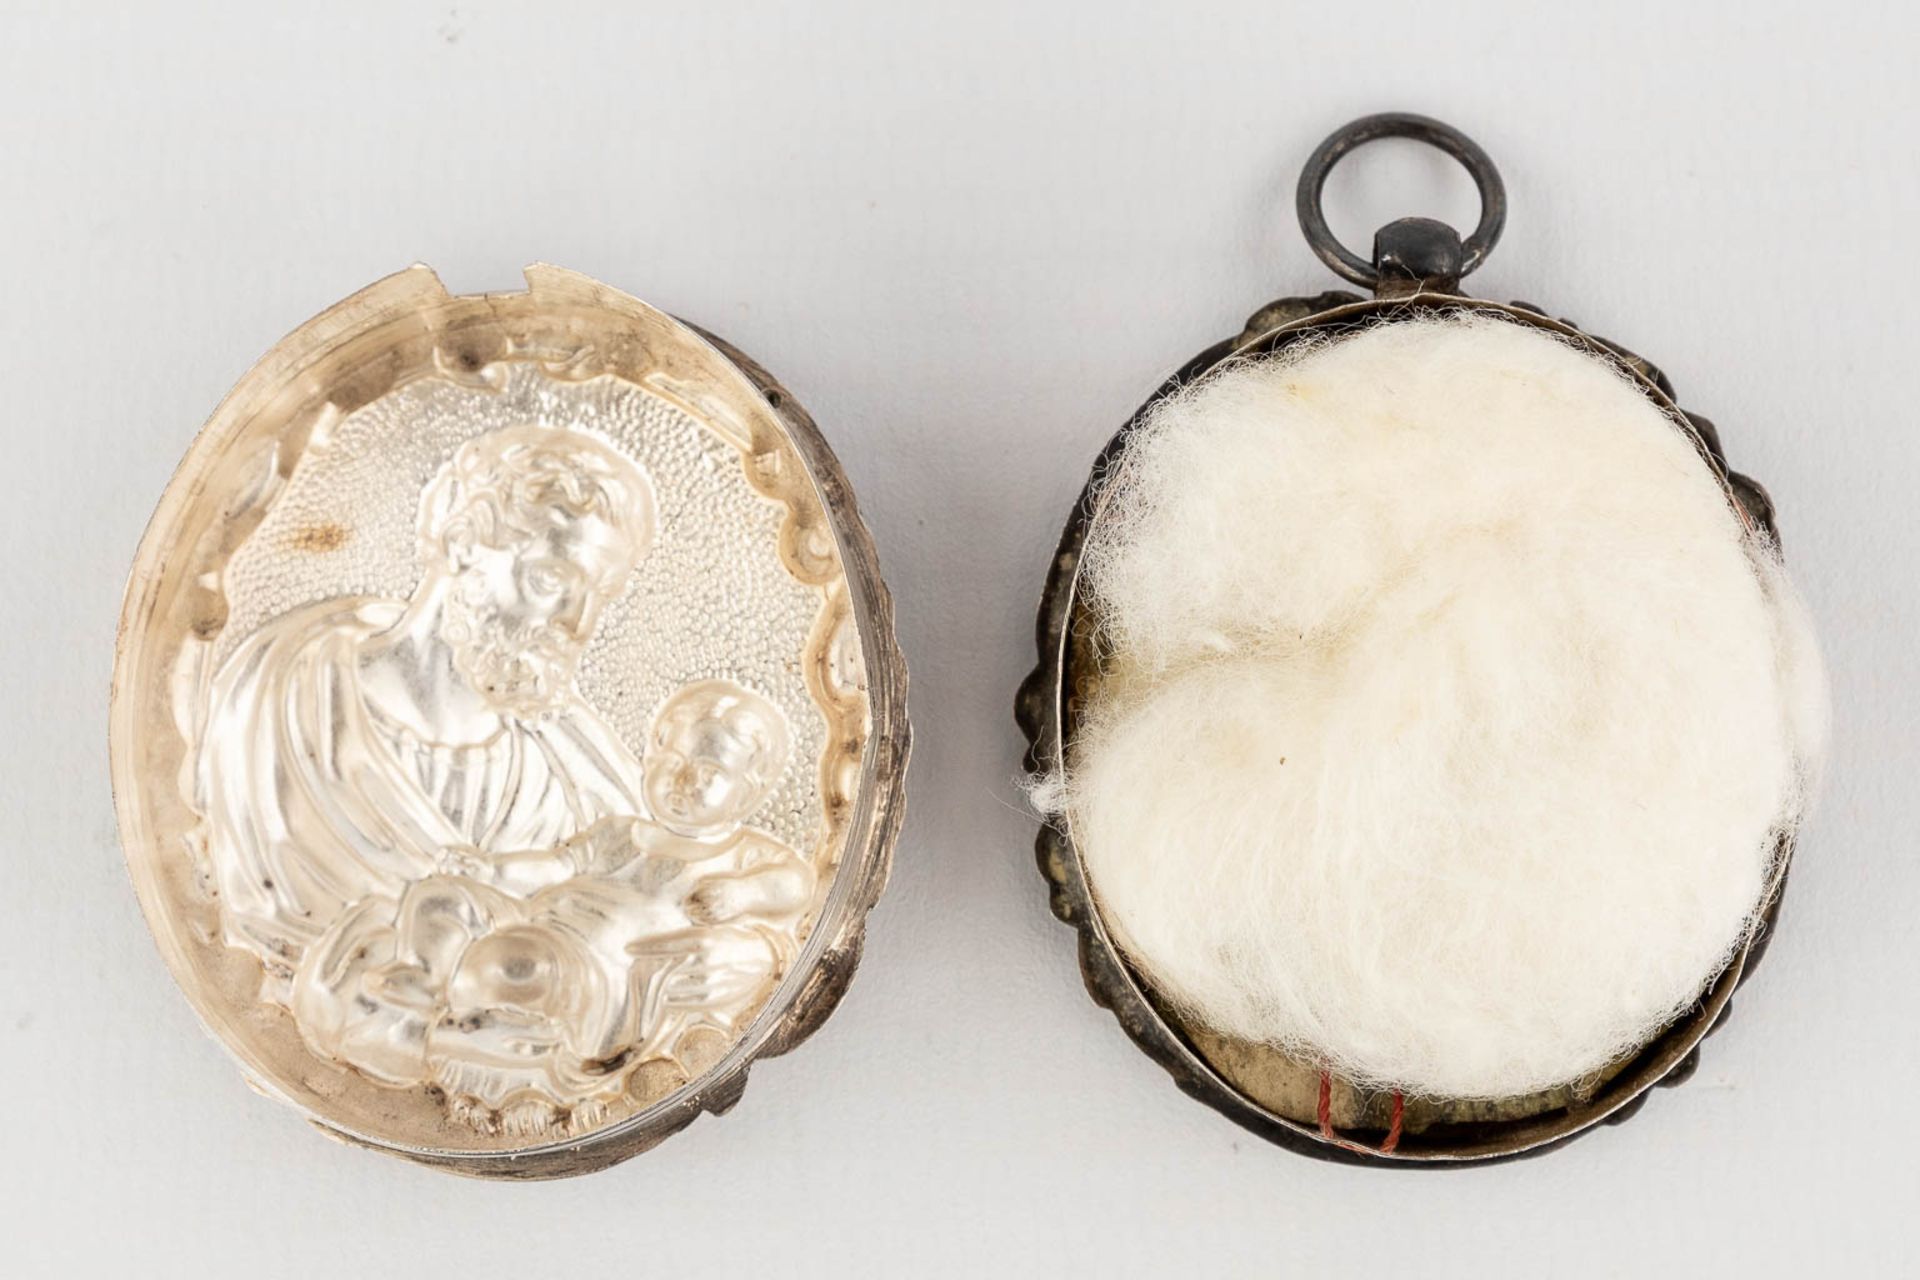 A set of 5 relics in a silver theca, with a repousse image of Joseph and Jesus. 19th century. (W: 4 - Image 10 of 10